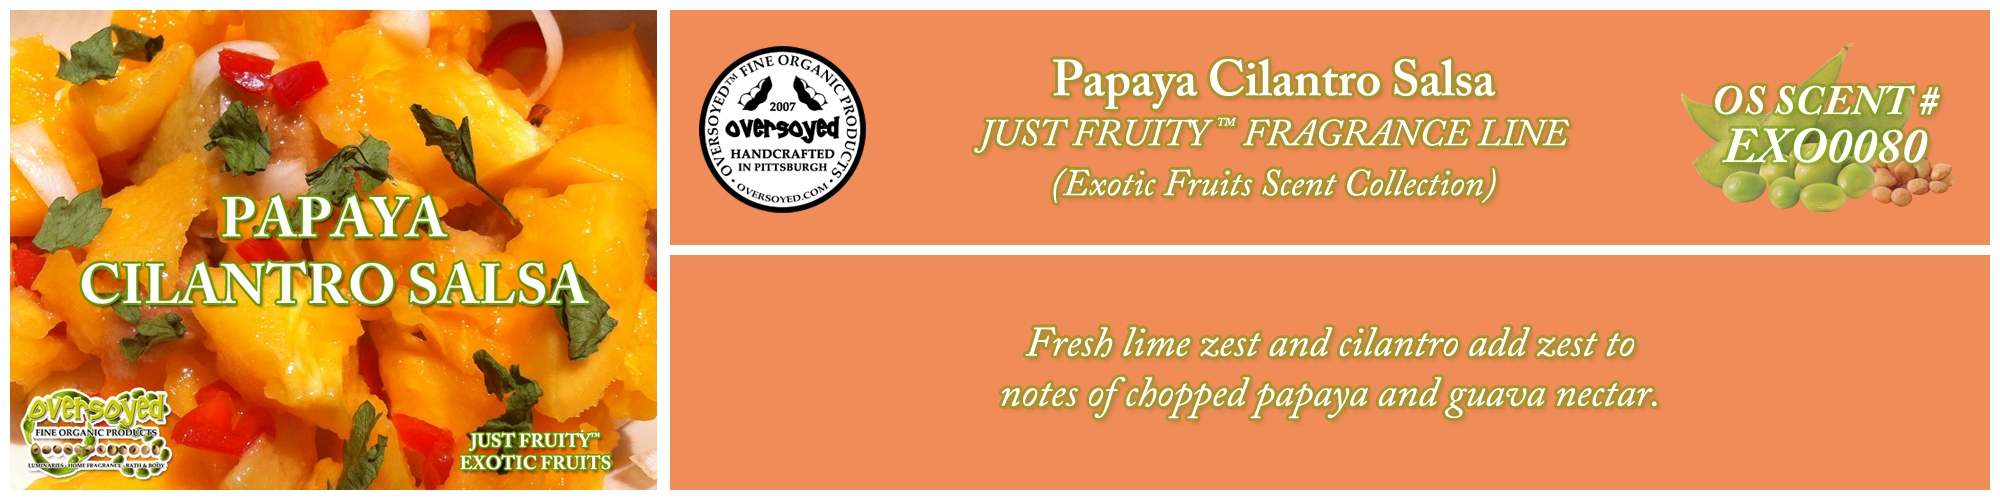 Papaya Cilantro Salsa Handcrafted Products Collection